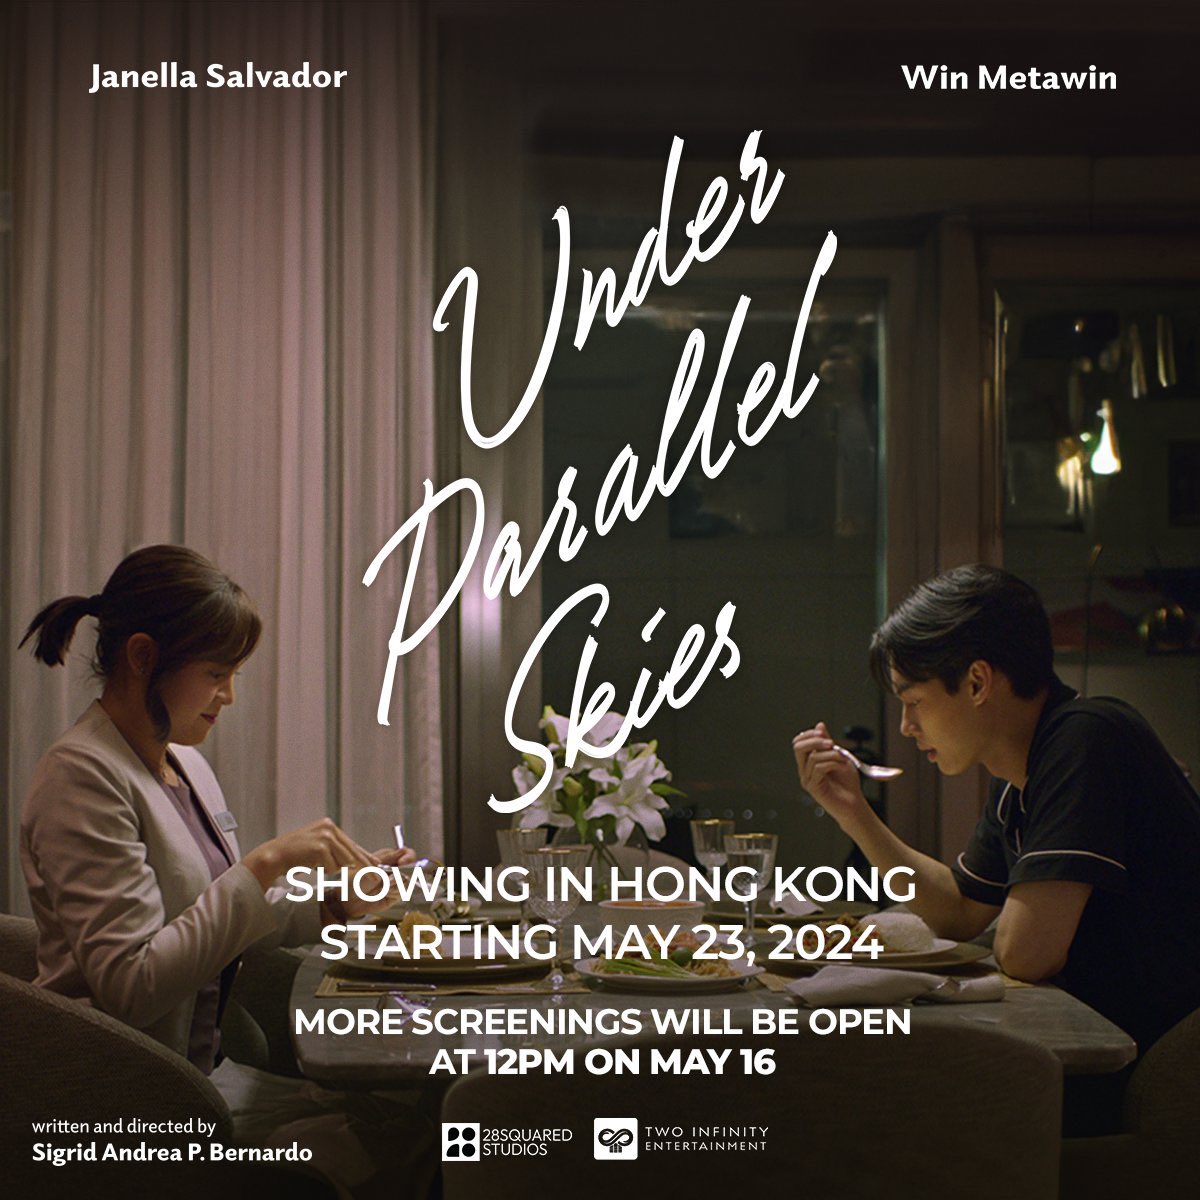 HONG KONG MOVIE FANS 🇭🇰 More screenings for 'Under Parallel Skies' have been added.➕🎥 Tickets are now available for purchase at 📌goldenscene.com showing in Hong Kong starting 🗓️May 23, 2024 📍At Golden Scene Cinema #UnderParallelSkies #รักใต้ฟ้าคู่ขนาน